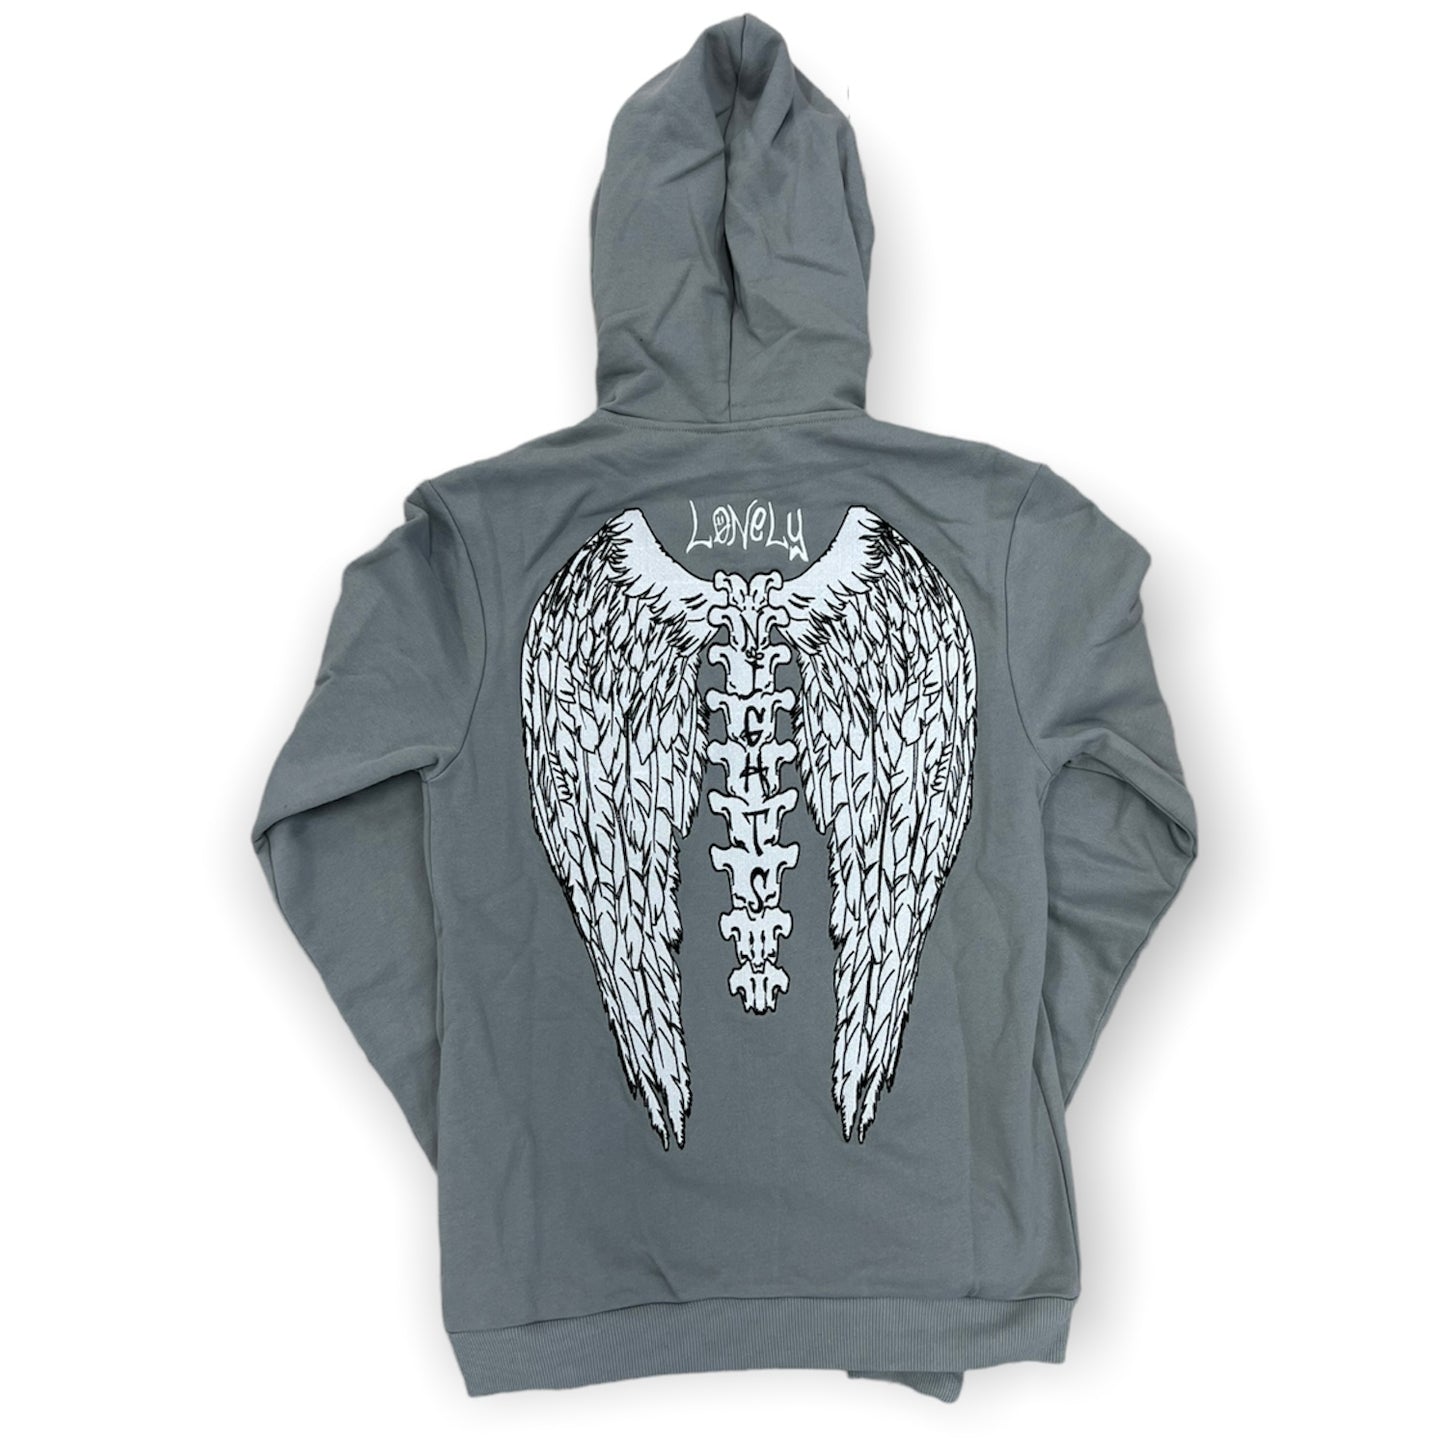 Lonely Nights Zip Up Grey and White